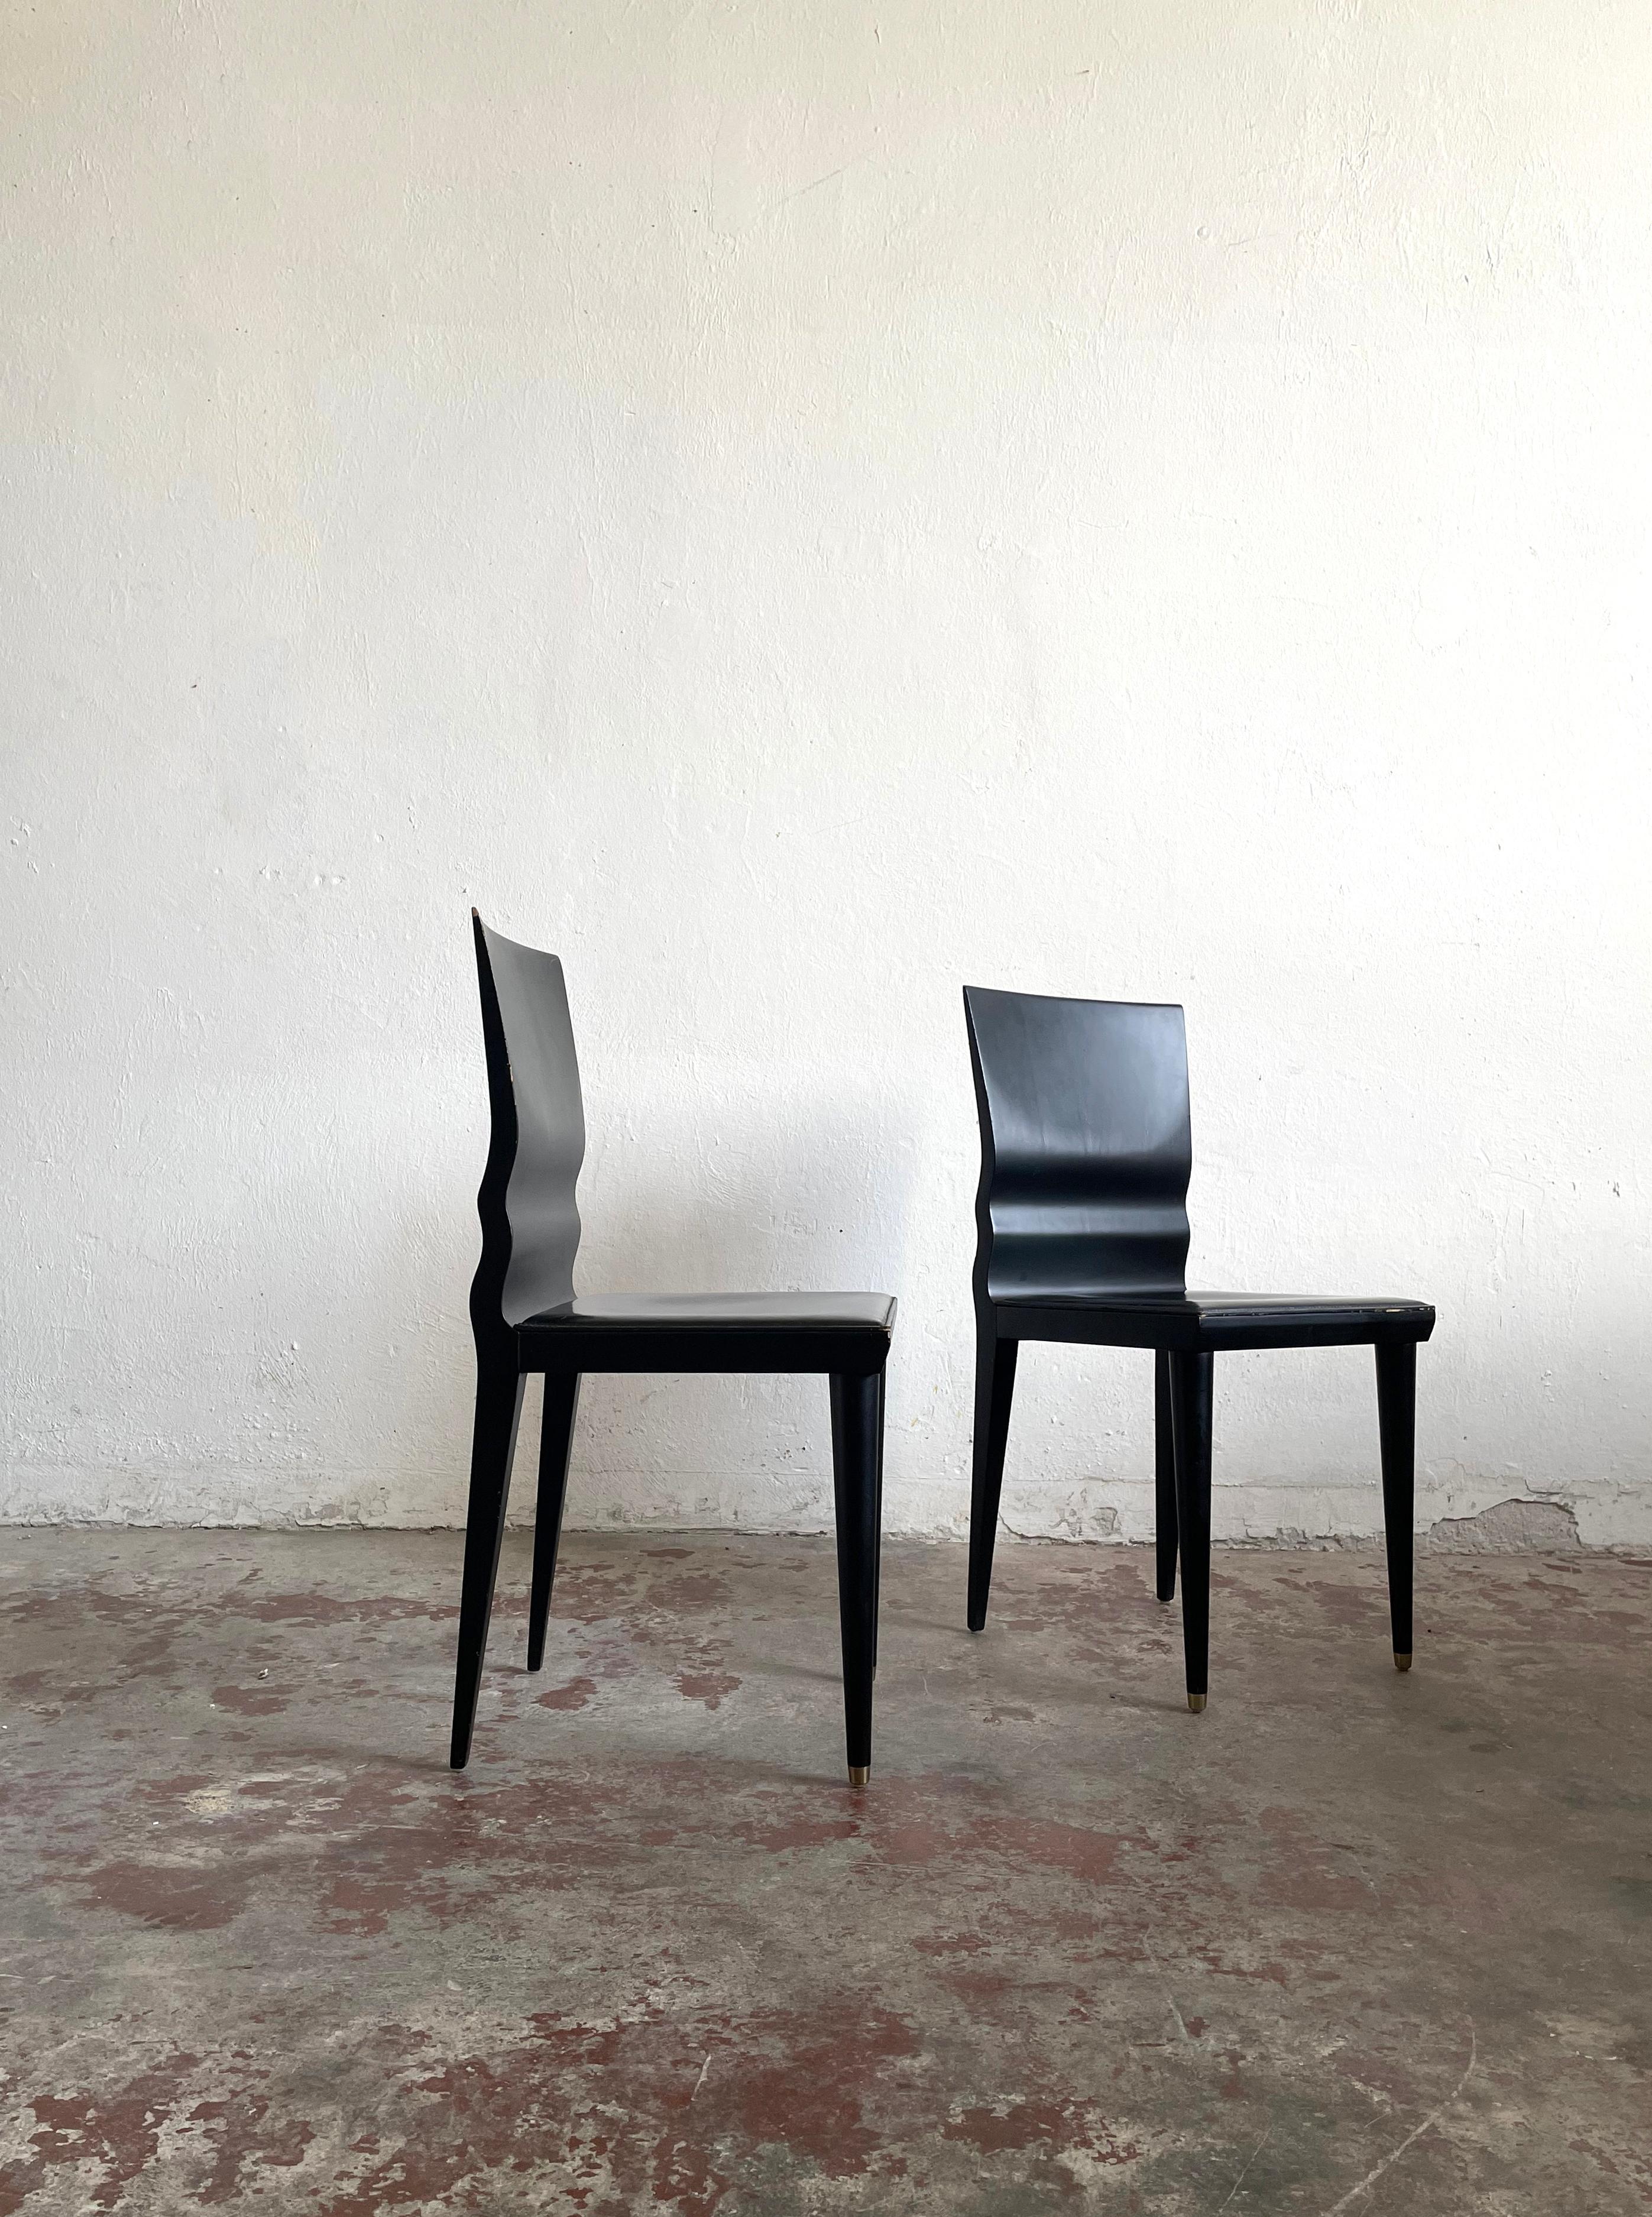 Two ebonized wood chairs with black leather padded seats, model 'Diva', designed in 1987 by William Sawaya for Sawaya & Moroni 

The chairs were in production during the late 1980s and 1990s 

The chairs have some traces of wear shown on the